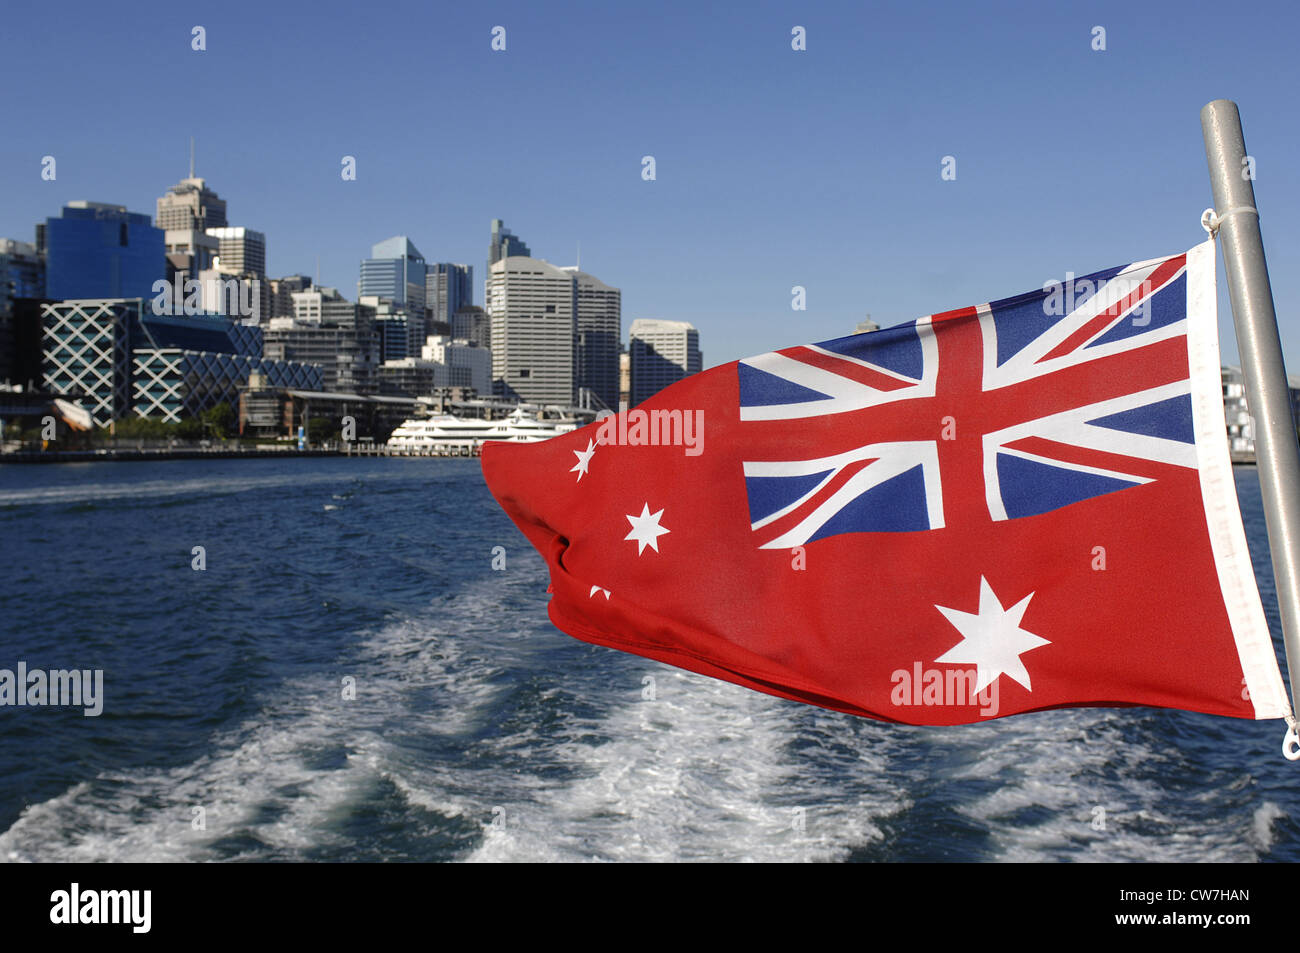 Australian Red Ensign on a boat front of the skyline of Sydney, Darling Harbour, Sydney Stock - Alamy